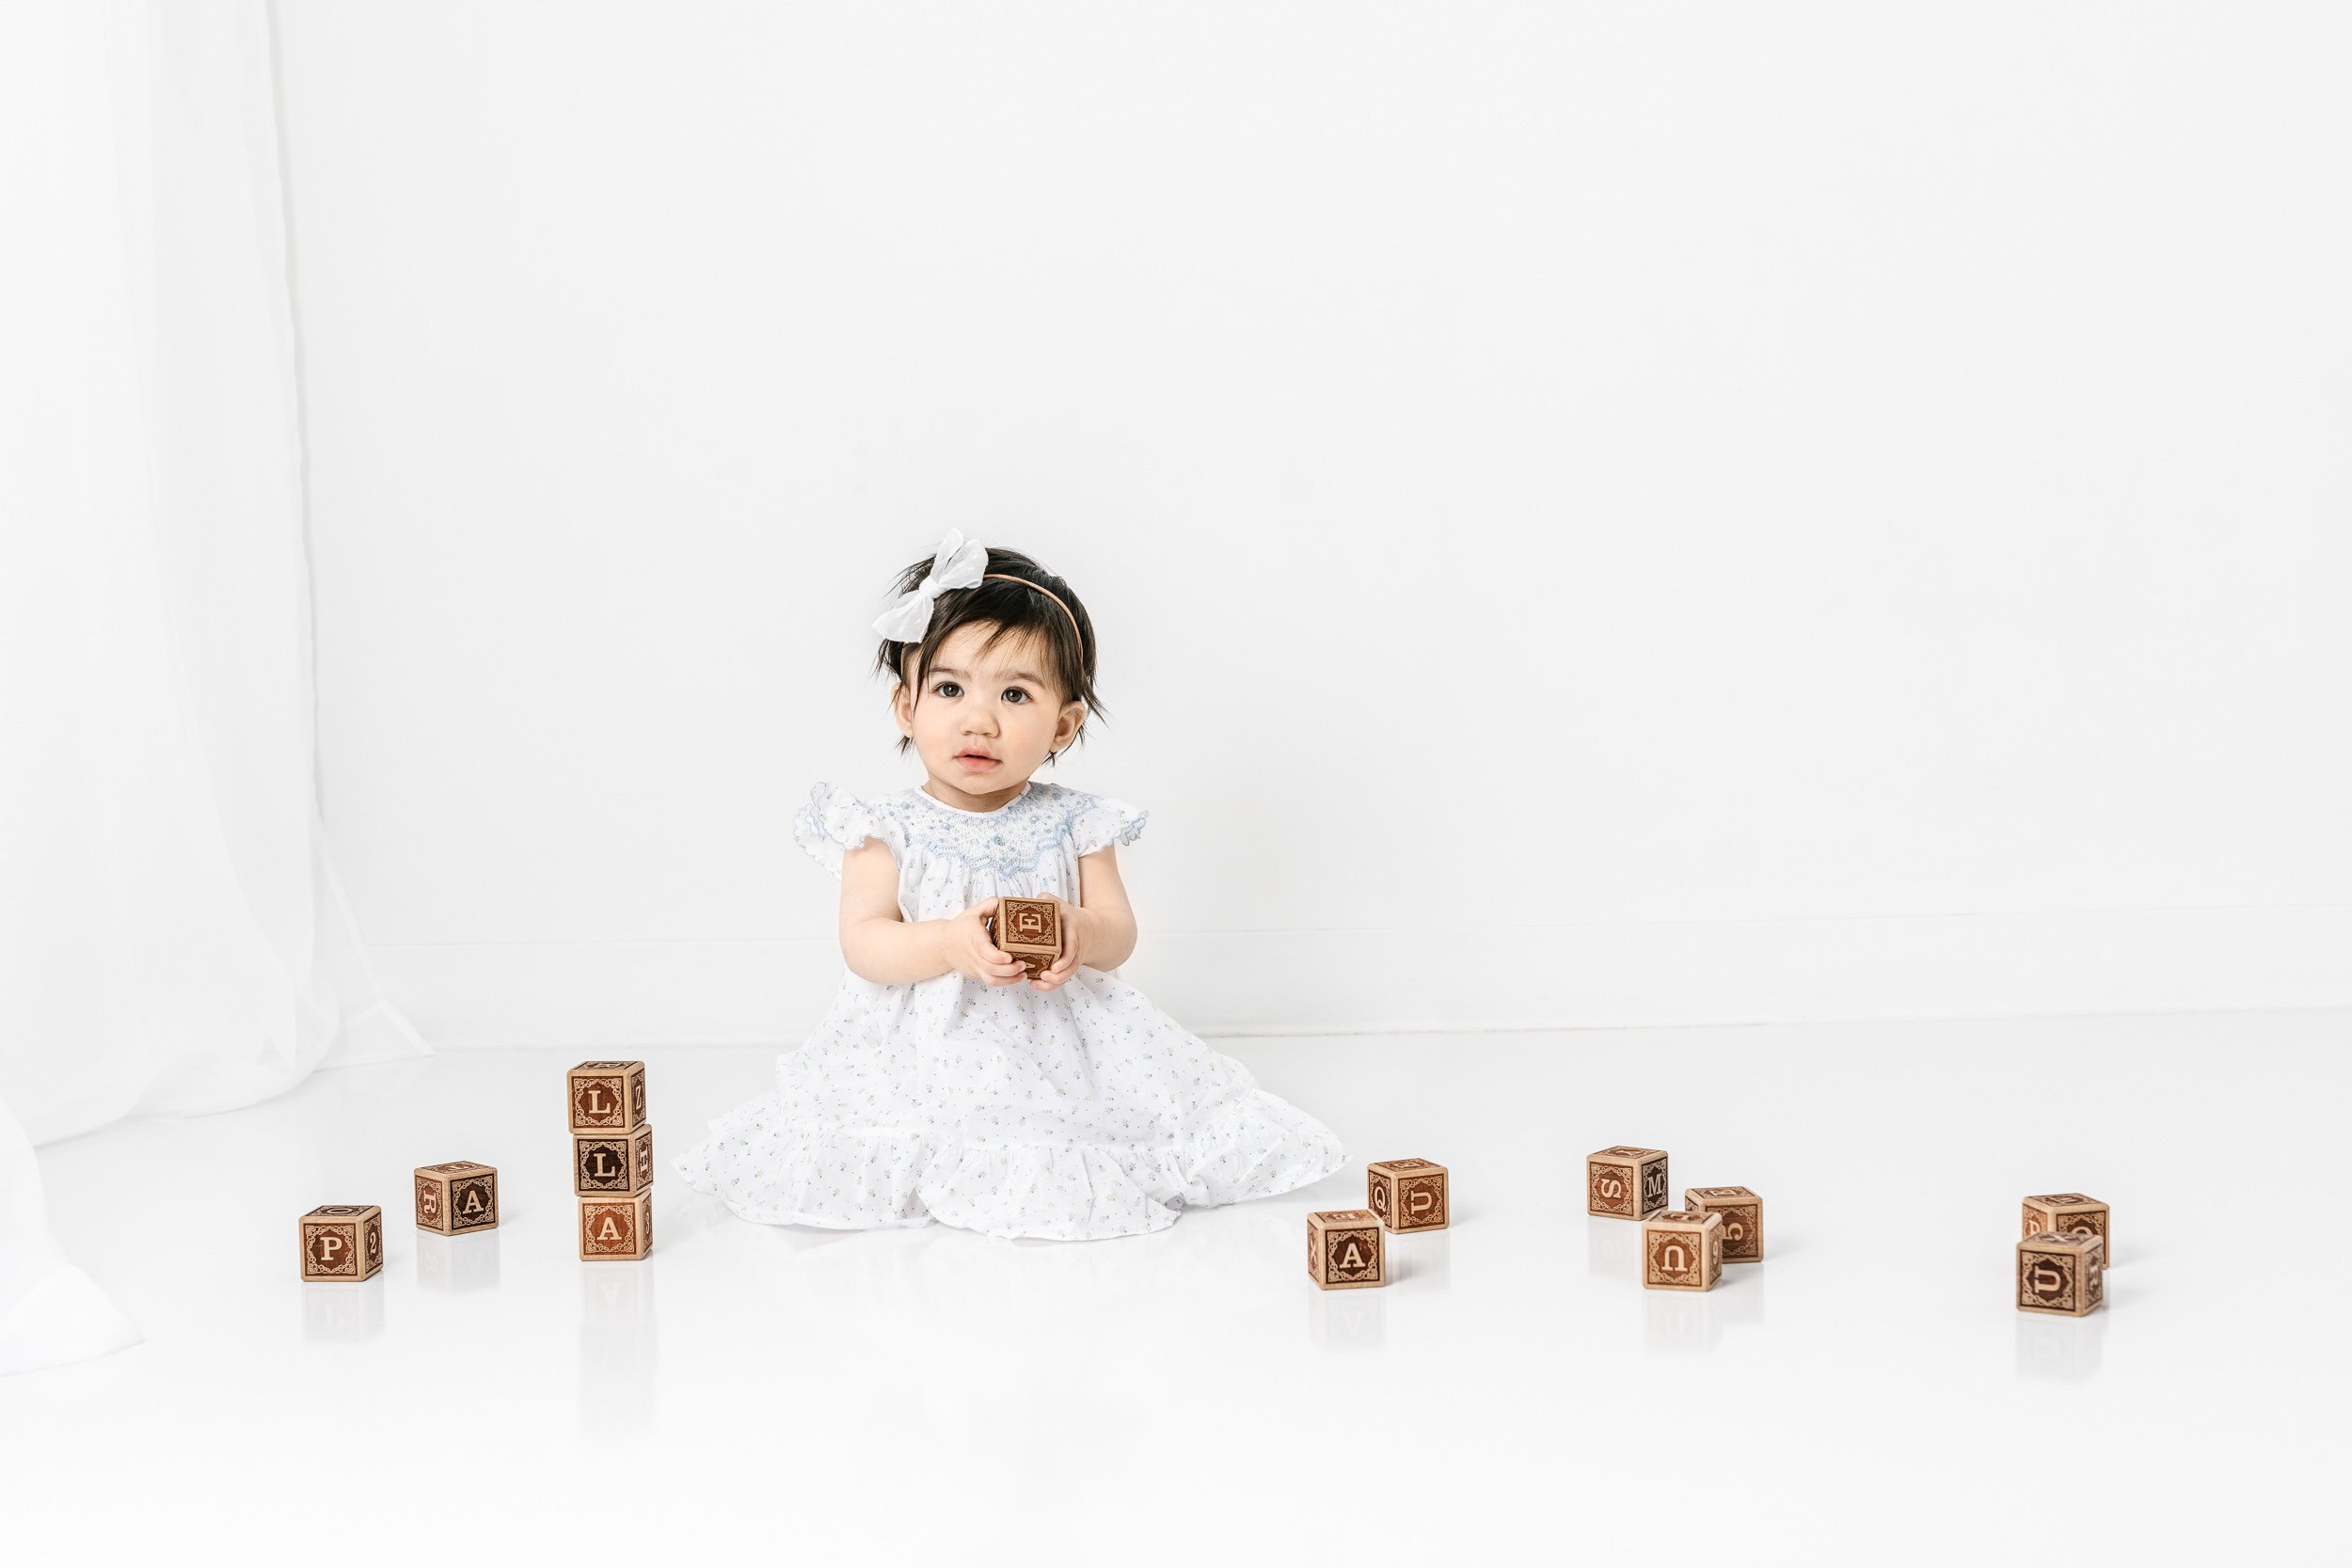  Little girl playing with wooden blocks in a white studio in New Jersey by Nicole Hawkins Photography. baby with blocks white studio #nicolehawkinsphotography #nicolehawkinsbirthday #nicolehawkinsportraits #NJstudiophotography #1stbirthday 